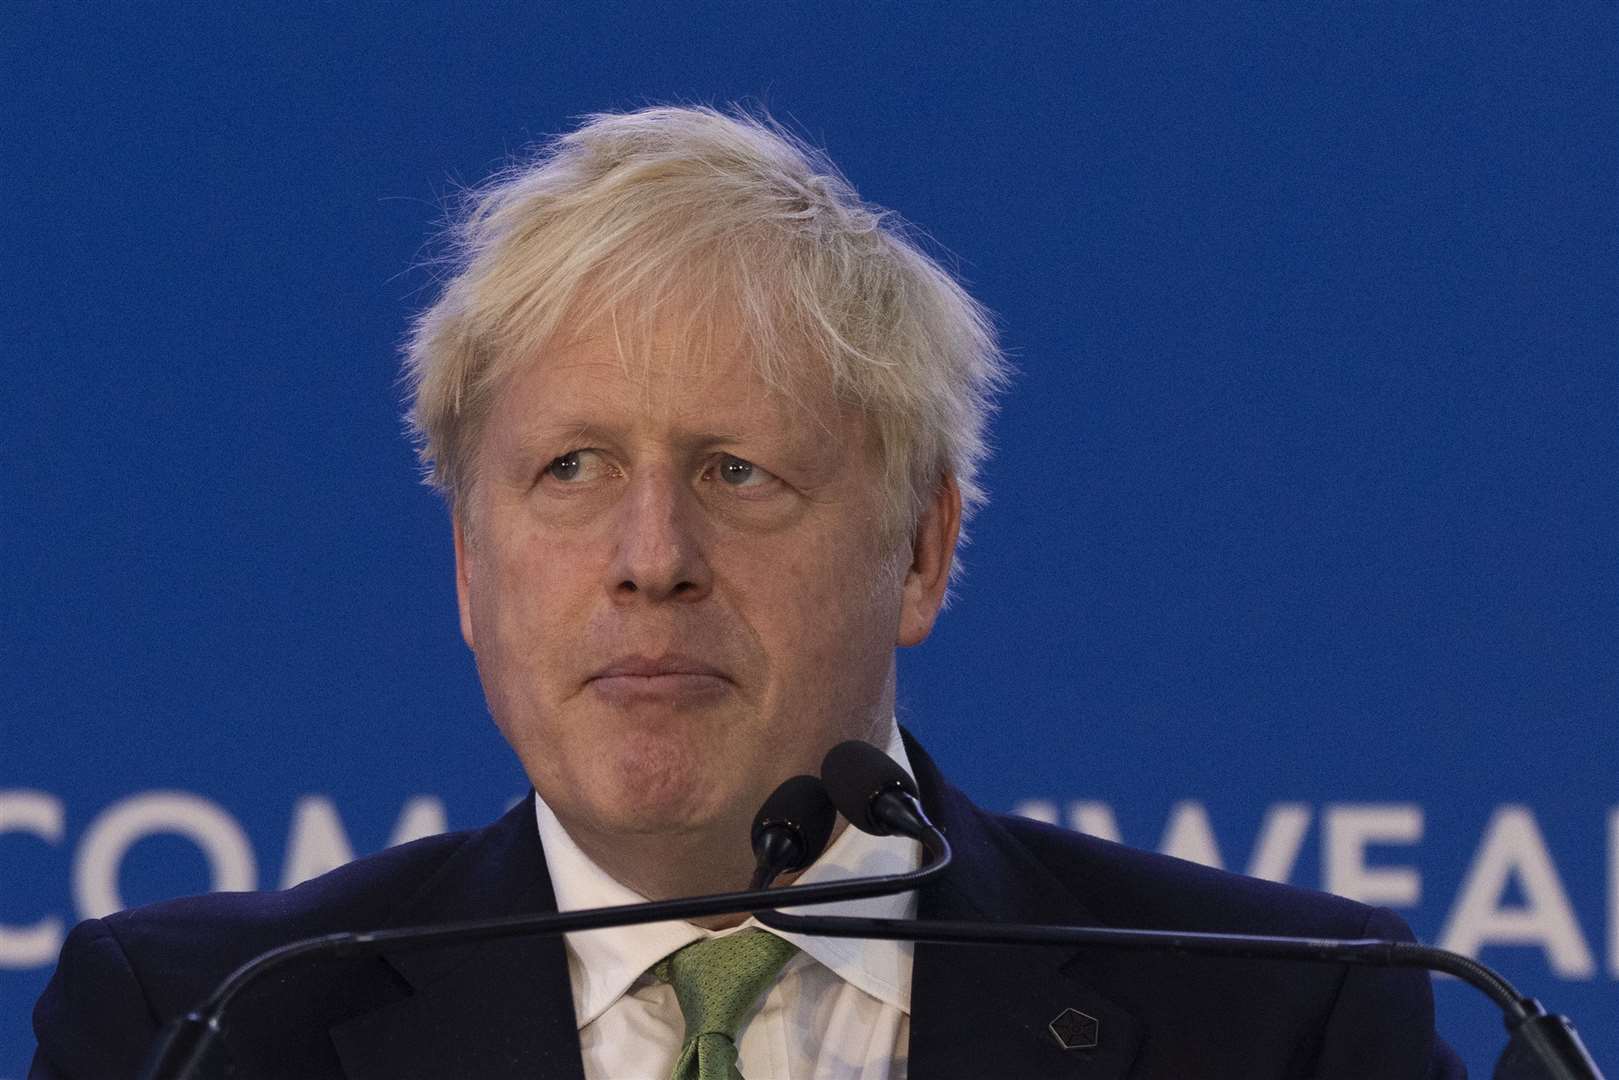 Prime Minister Boris Johnson visited Rwanda only a few weeks ago, where he heralded his Government’s policy (Dan Kitwood/PA)